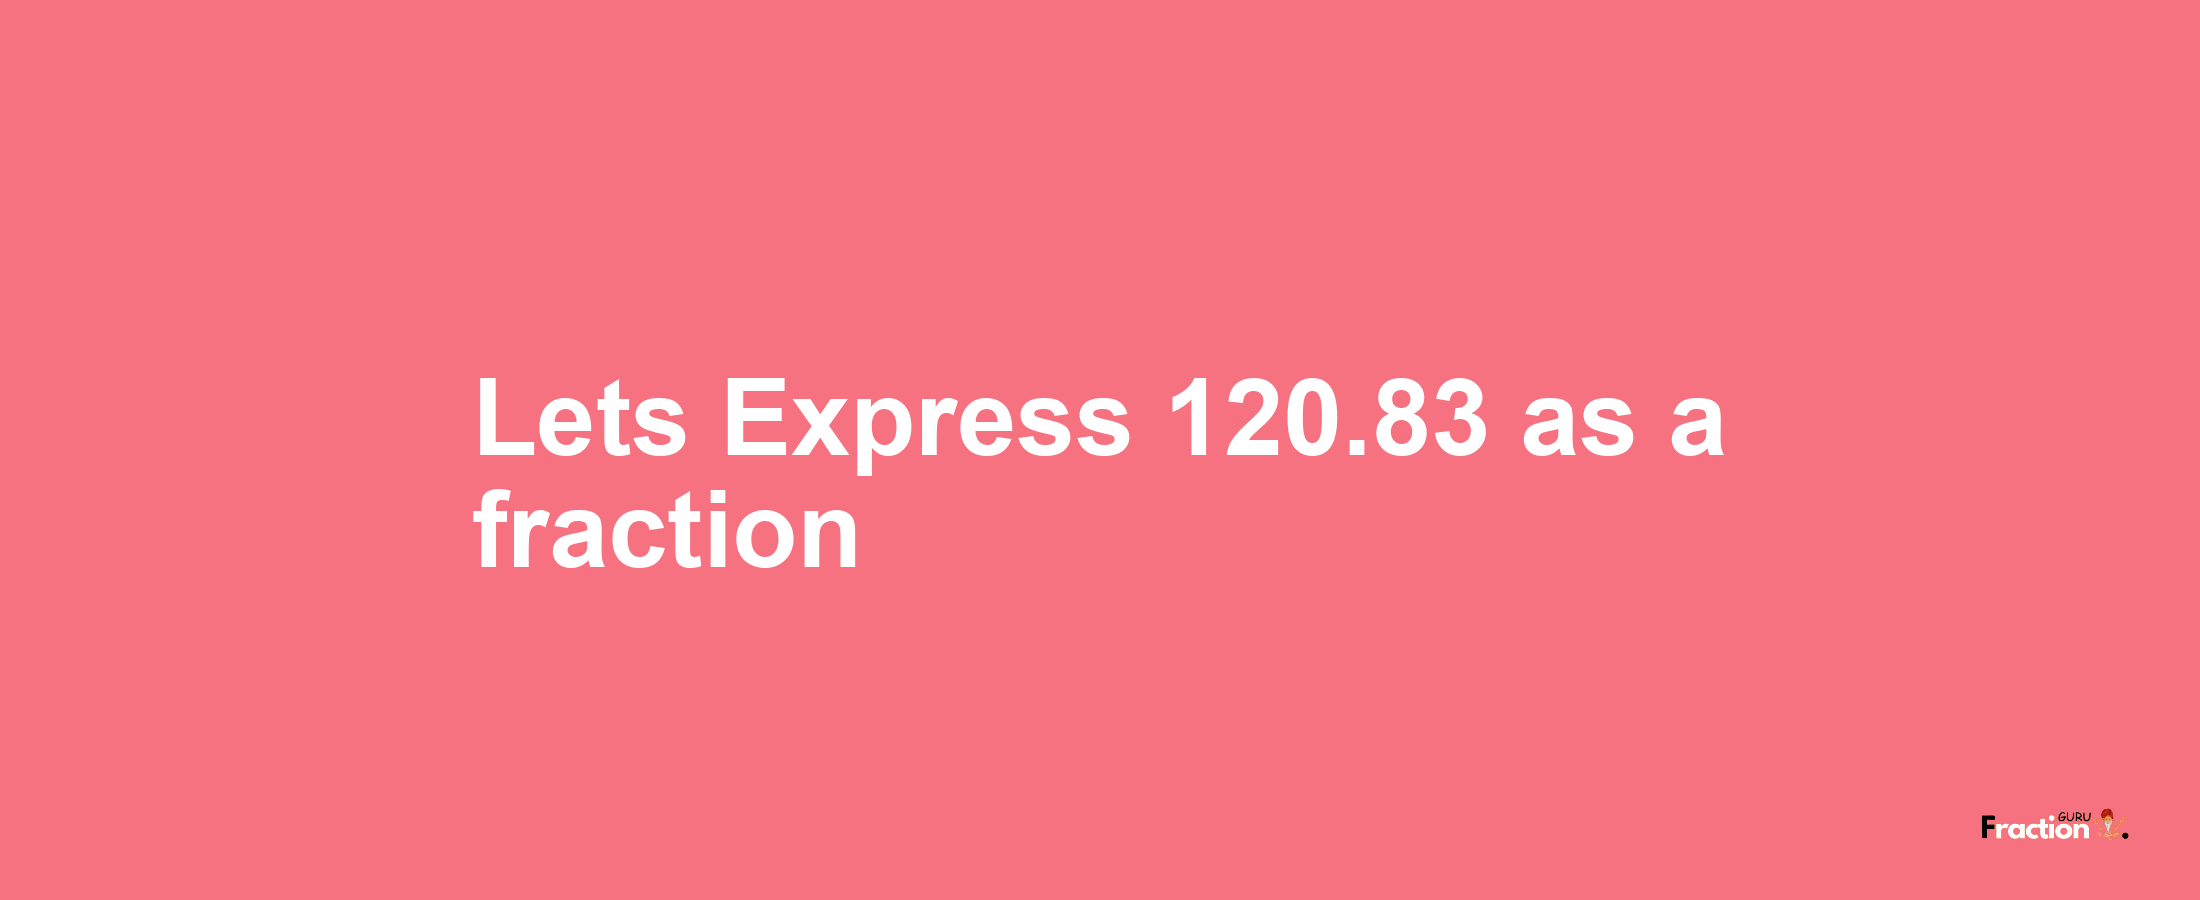 Lets Express 120.83 as afraction